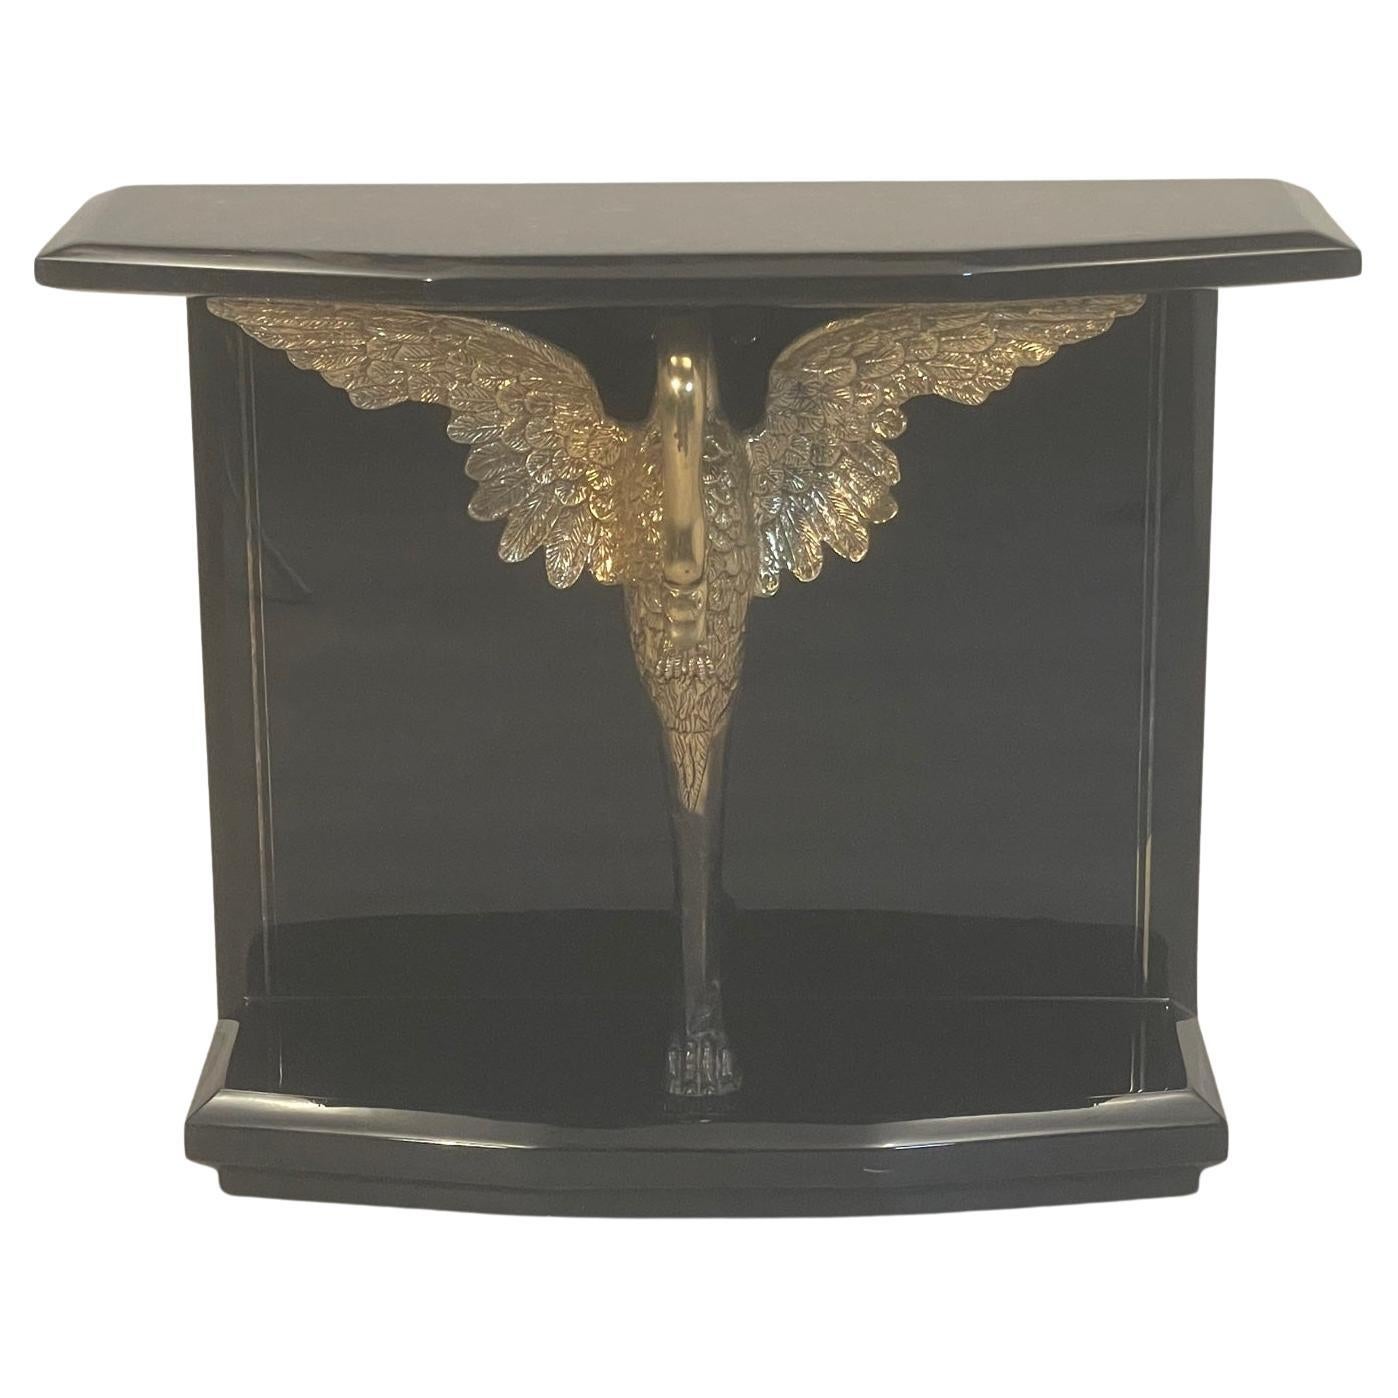 Outstanding Enrique Garcia Black Laquer Coconut Shell Console with Brass Swan